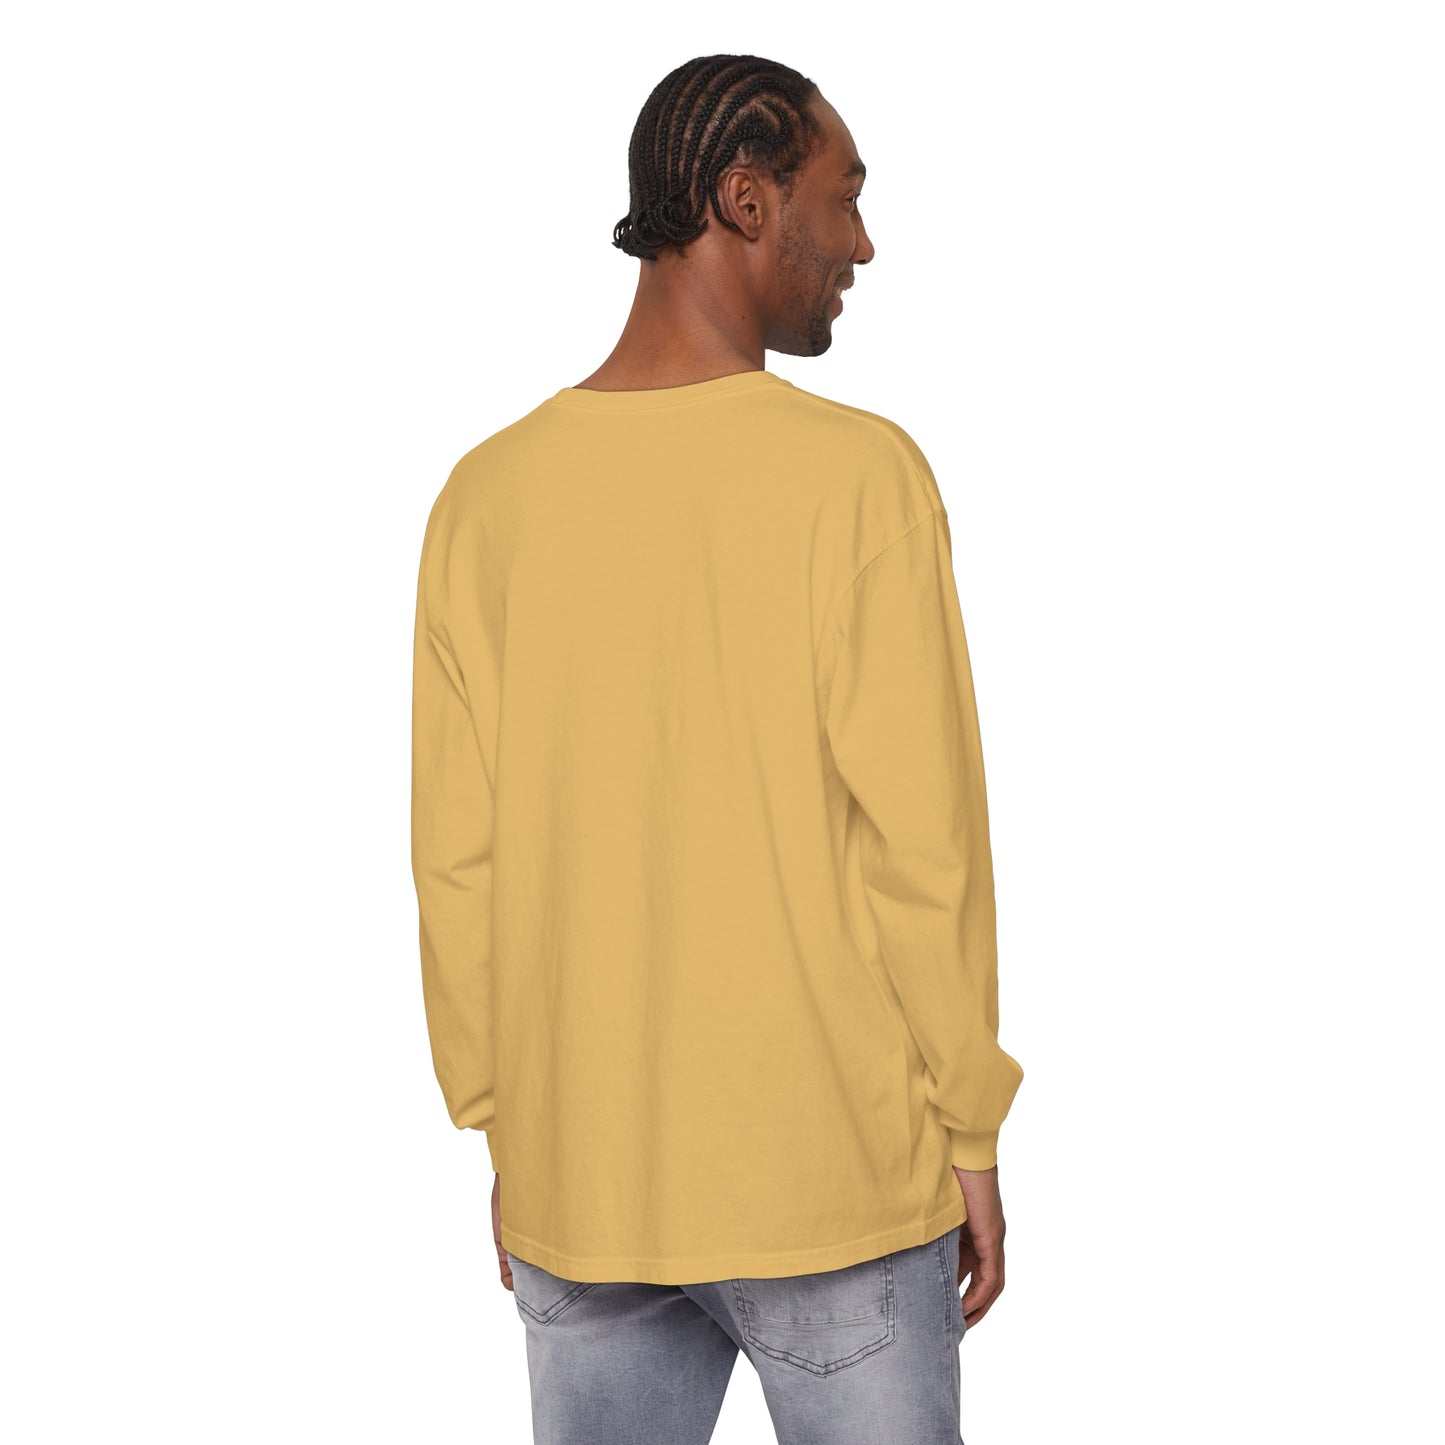 CUFFED Long Sleeve T-Shirt (Available In Other Colors)